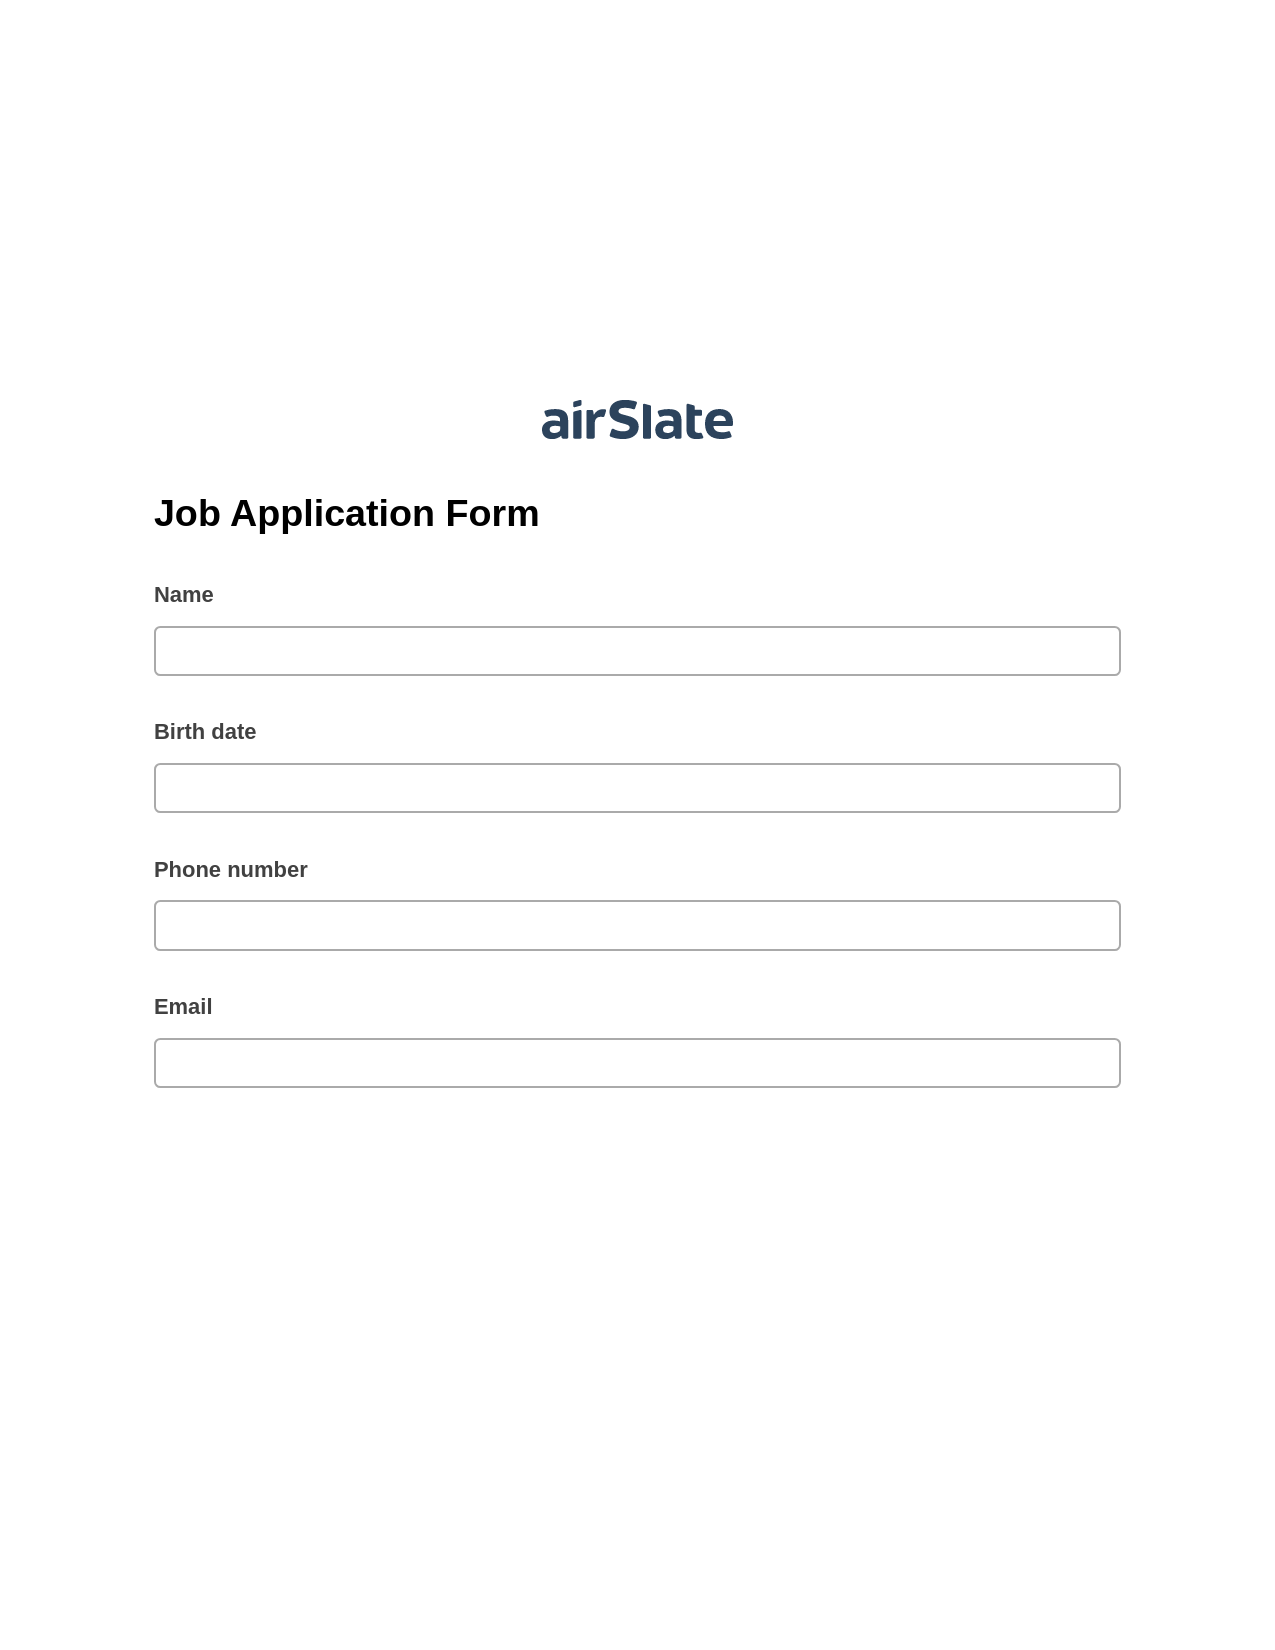 Job Application Form Pre-fill from CSV File Bot, Create MS Dynamics 365 Records Bot, Export to Salesforce Bot